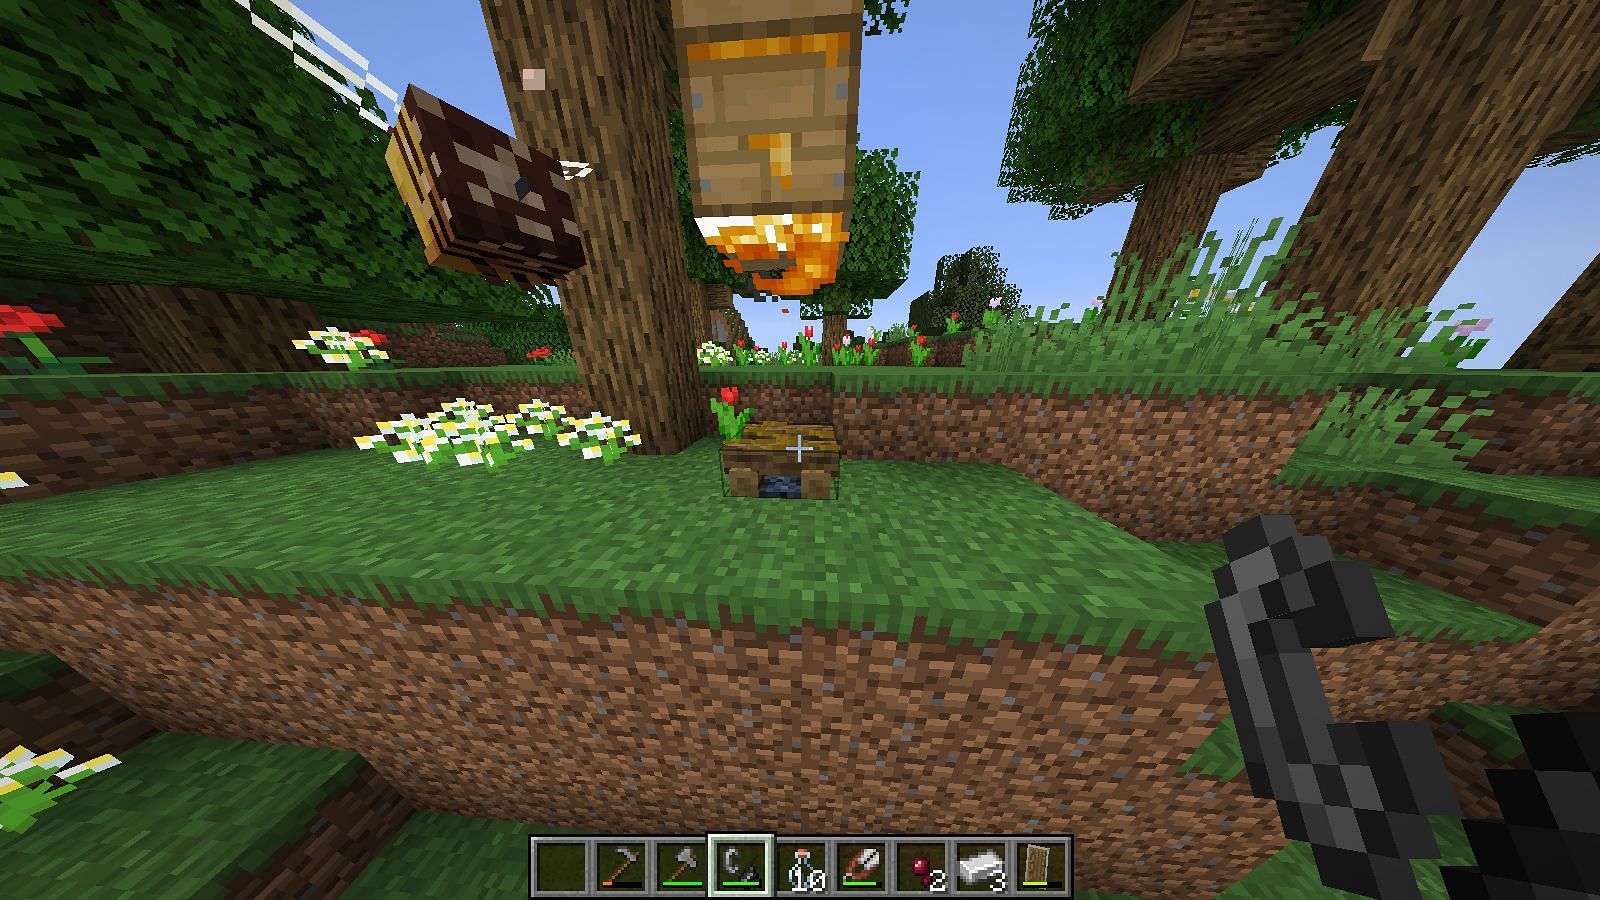 A campfire will pacify the bees so they can remove the beeswax without danger. Image via Minecraft